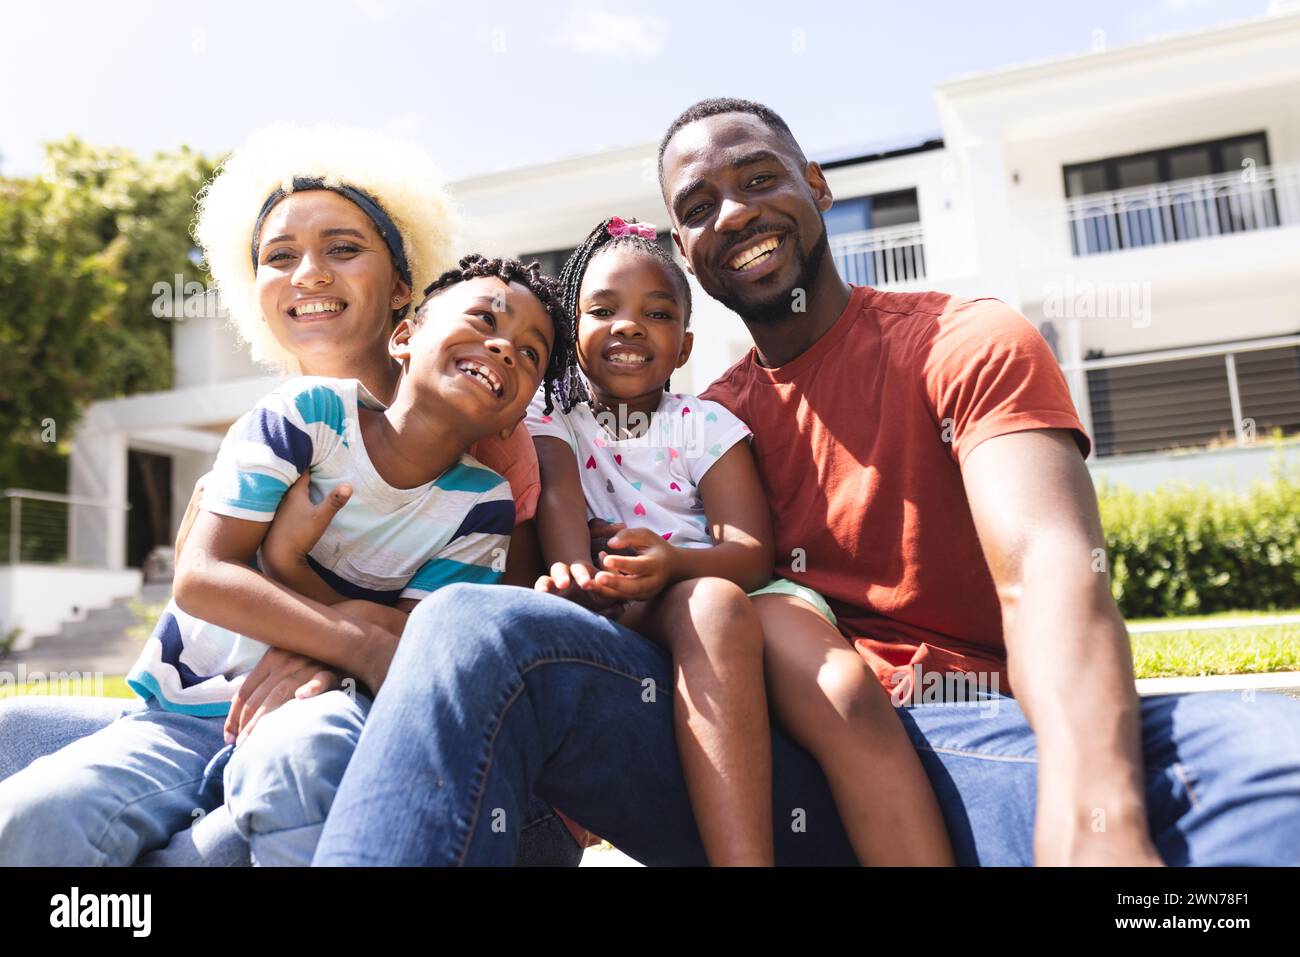 African American family with a father, mother, son, and daughter smiling outdoors Stock Photo